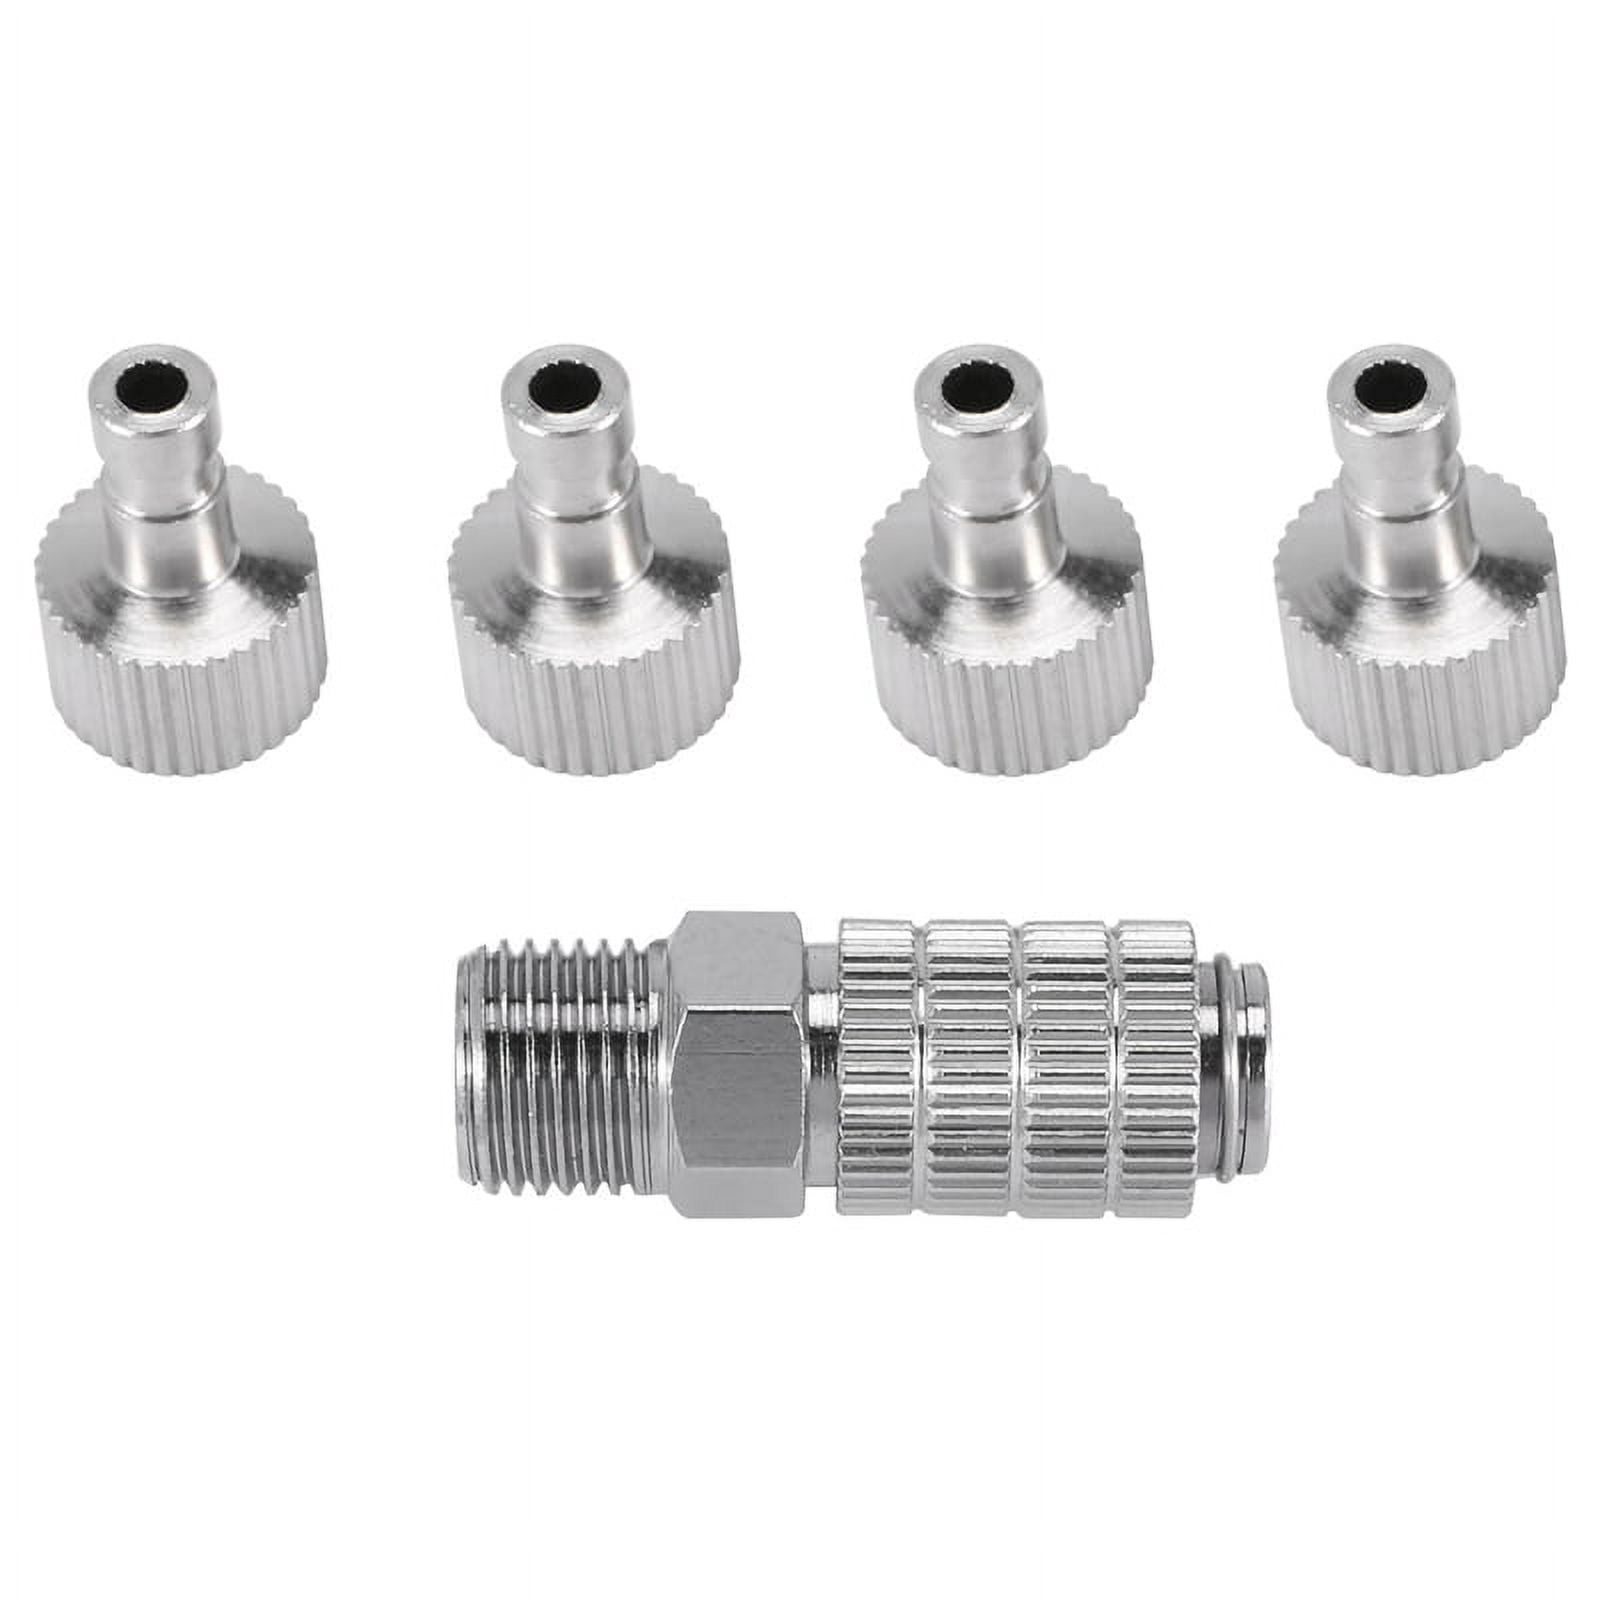 Airbrush Quick Disconnect Coupler Release Fitting Adapter with 5